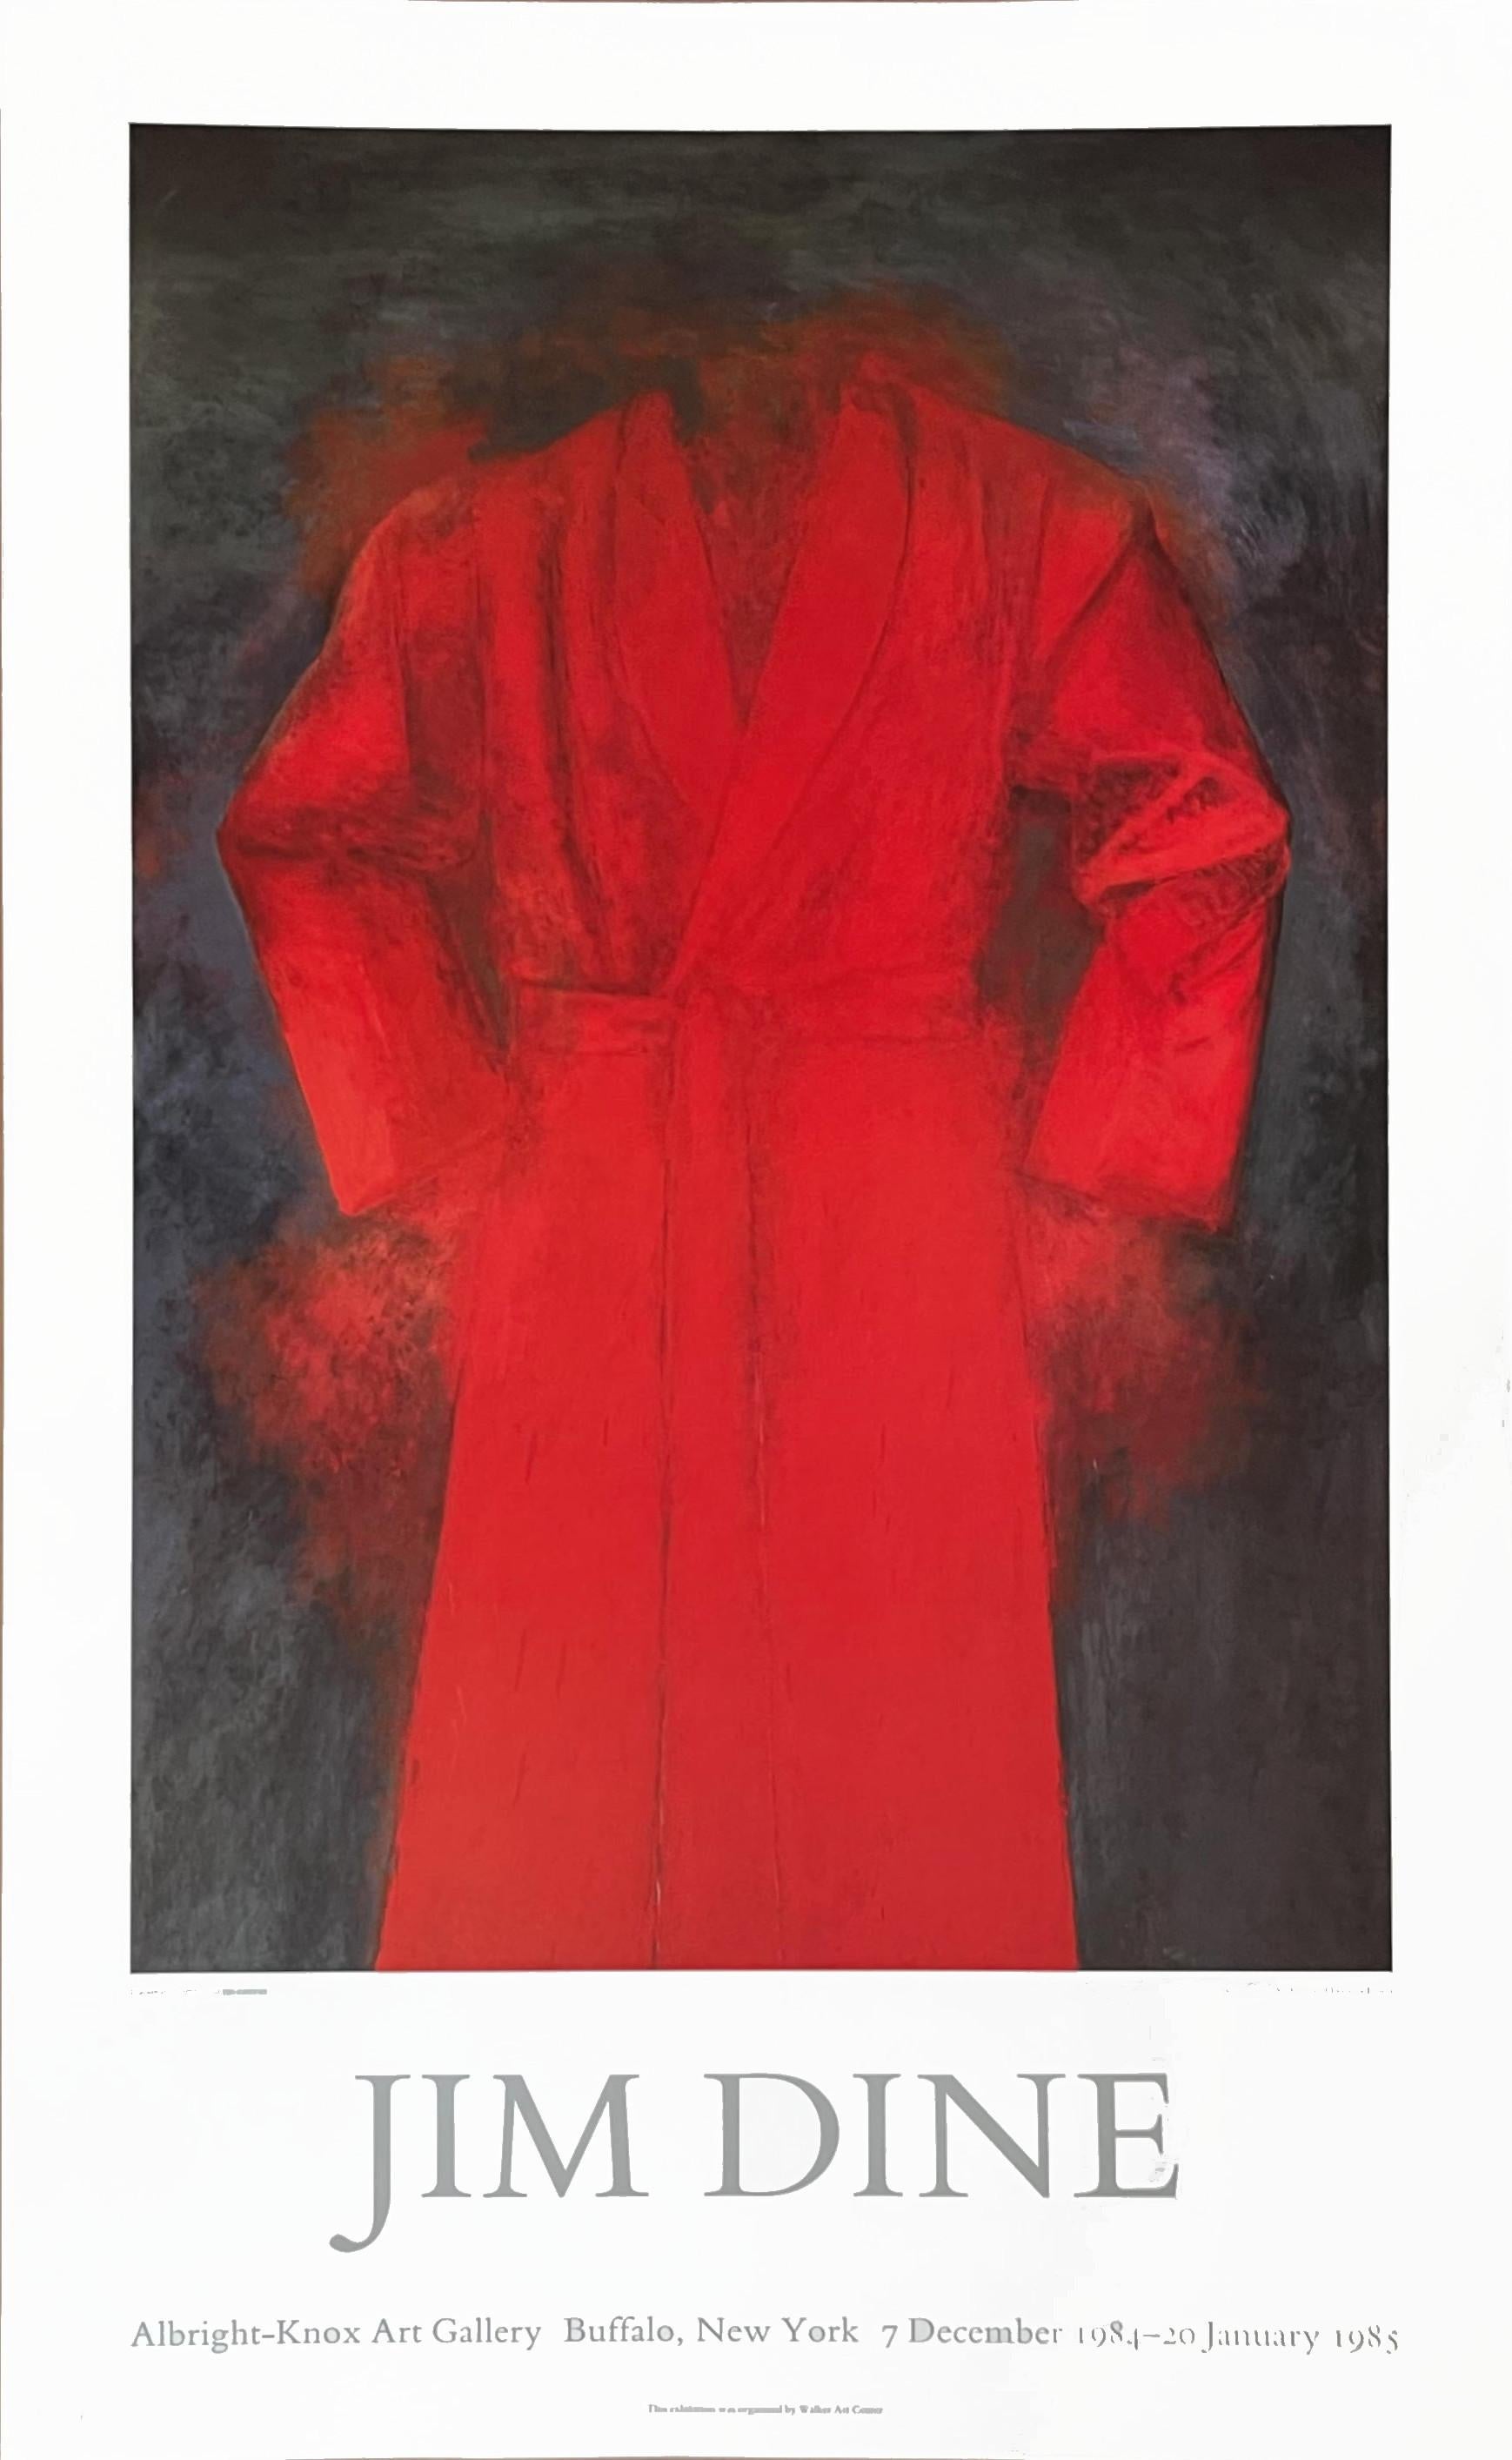 "Cardinal" Limited Ed Jim Dine at Albright Knox Large Red Robe Pop Art poster 